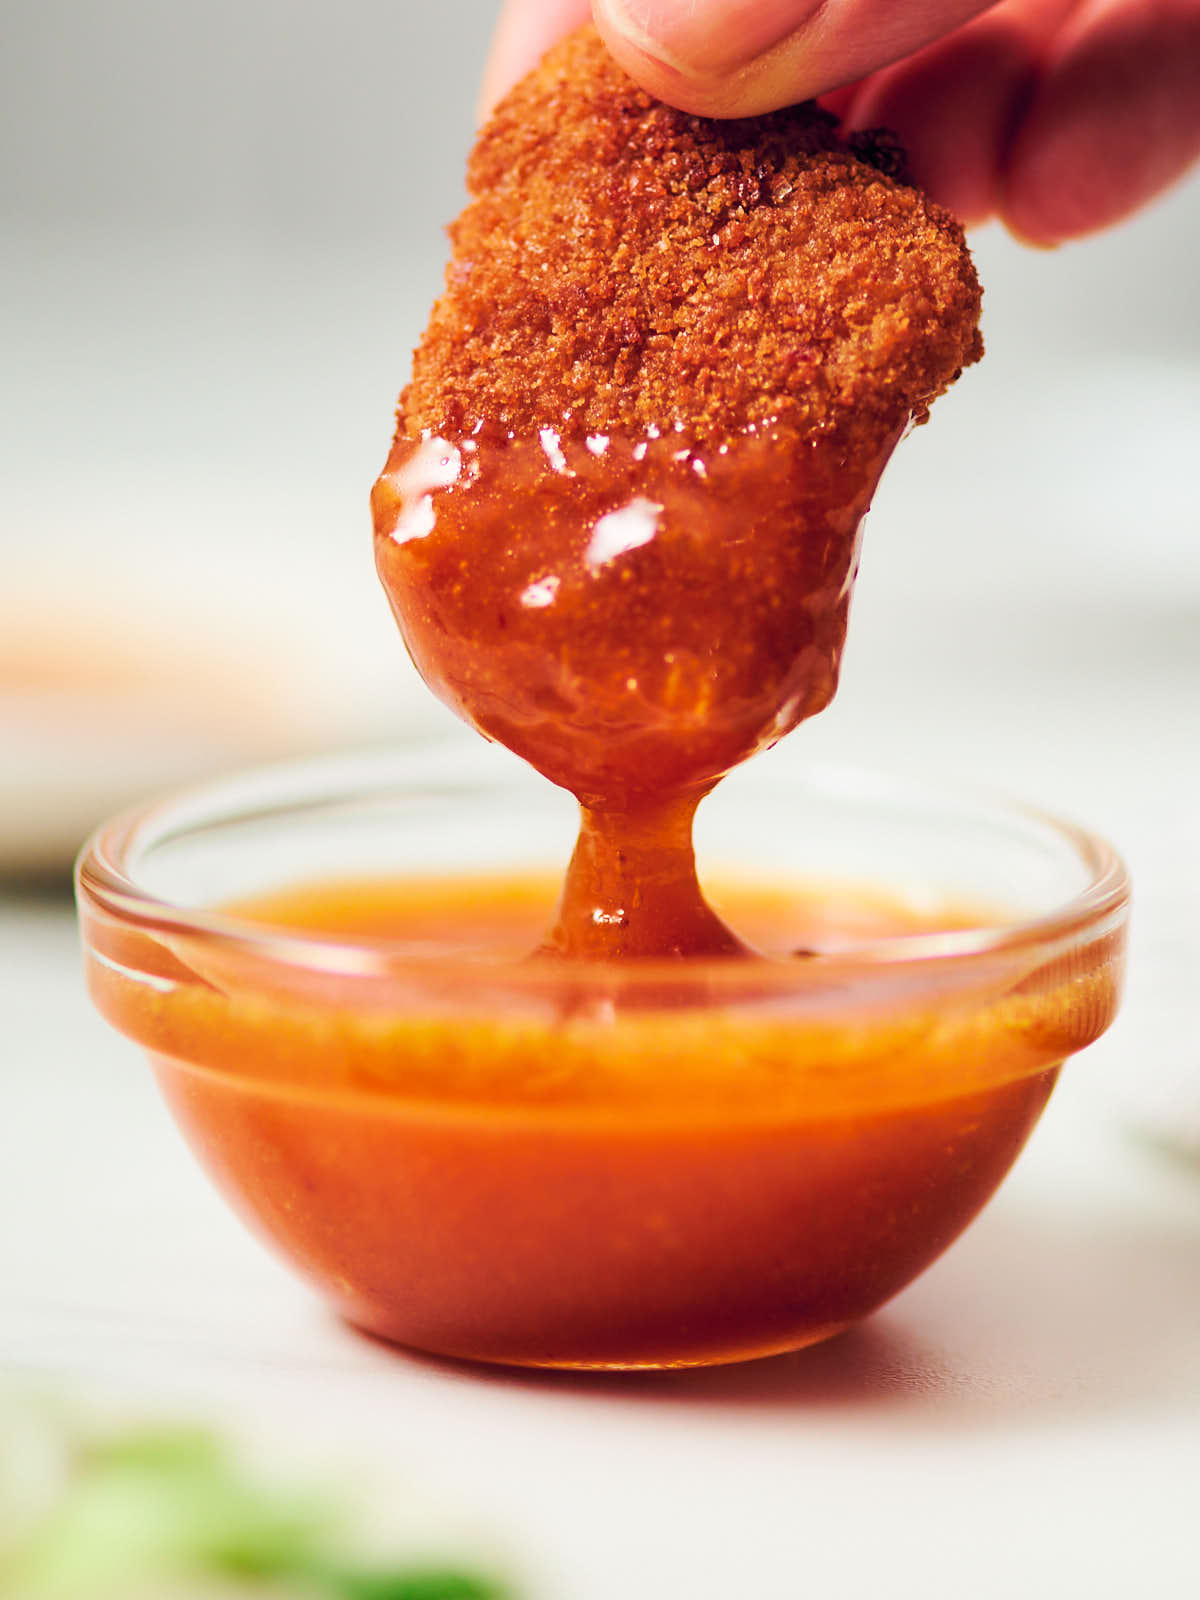 Plant-based chicken nugget being dipped in honey sriracha sauce.